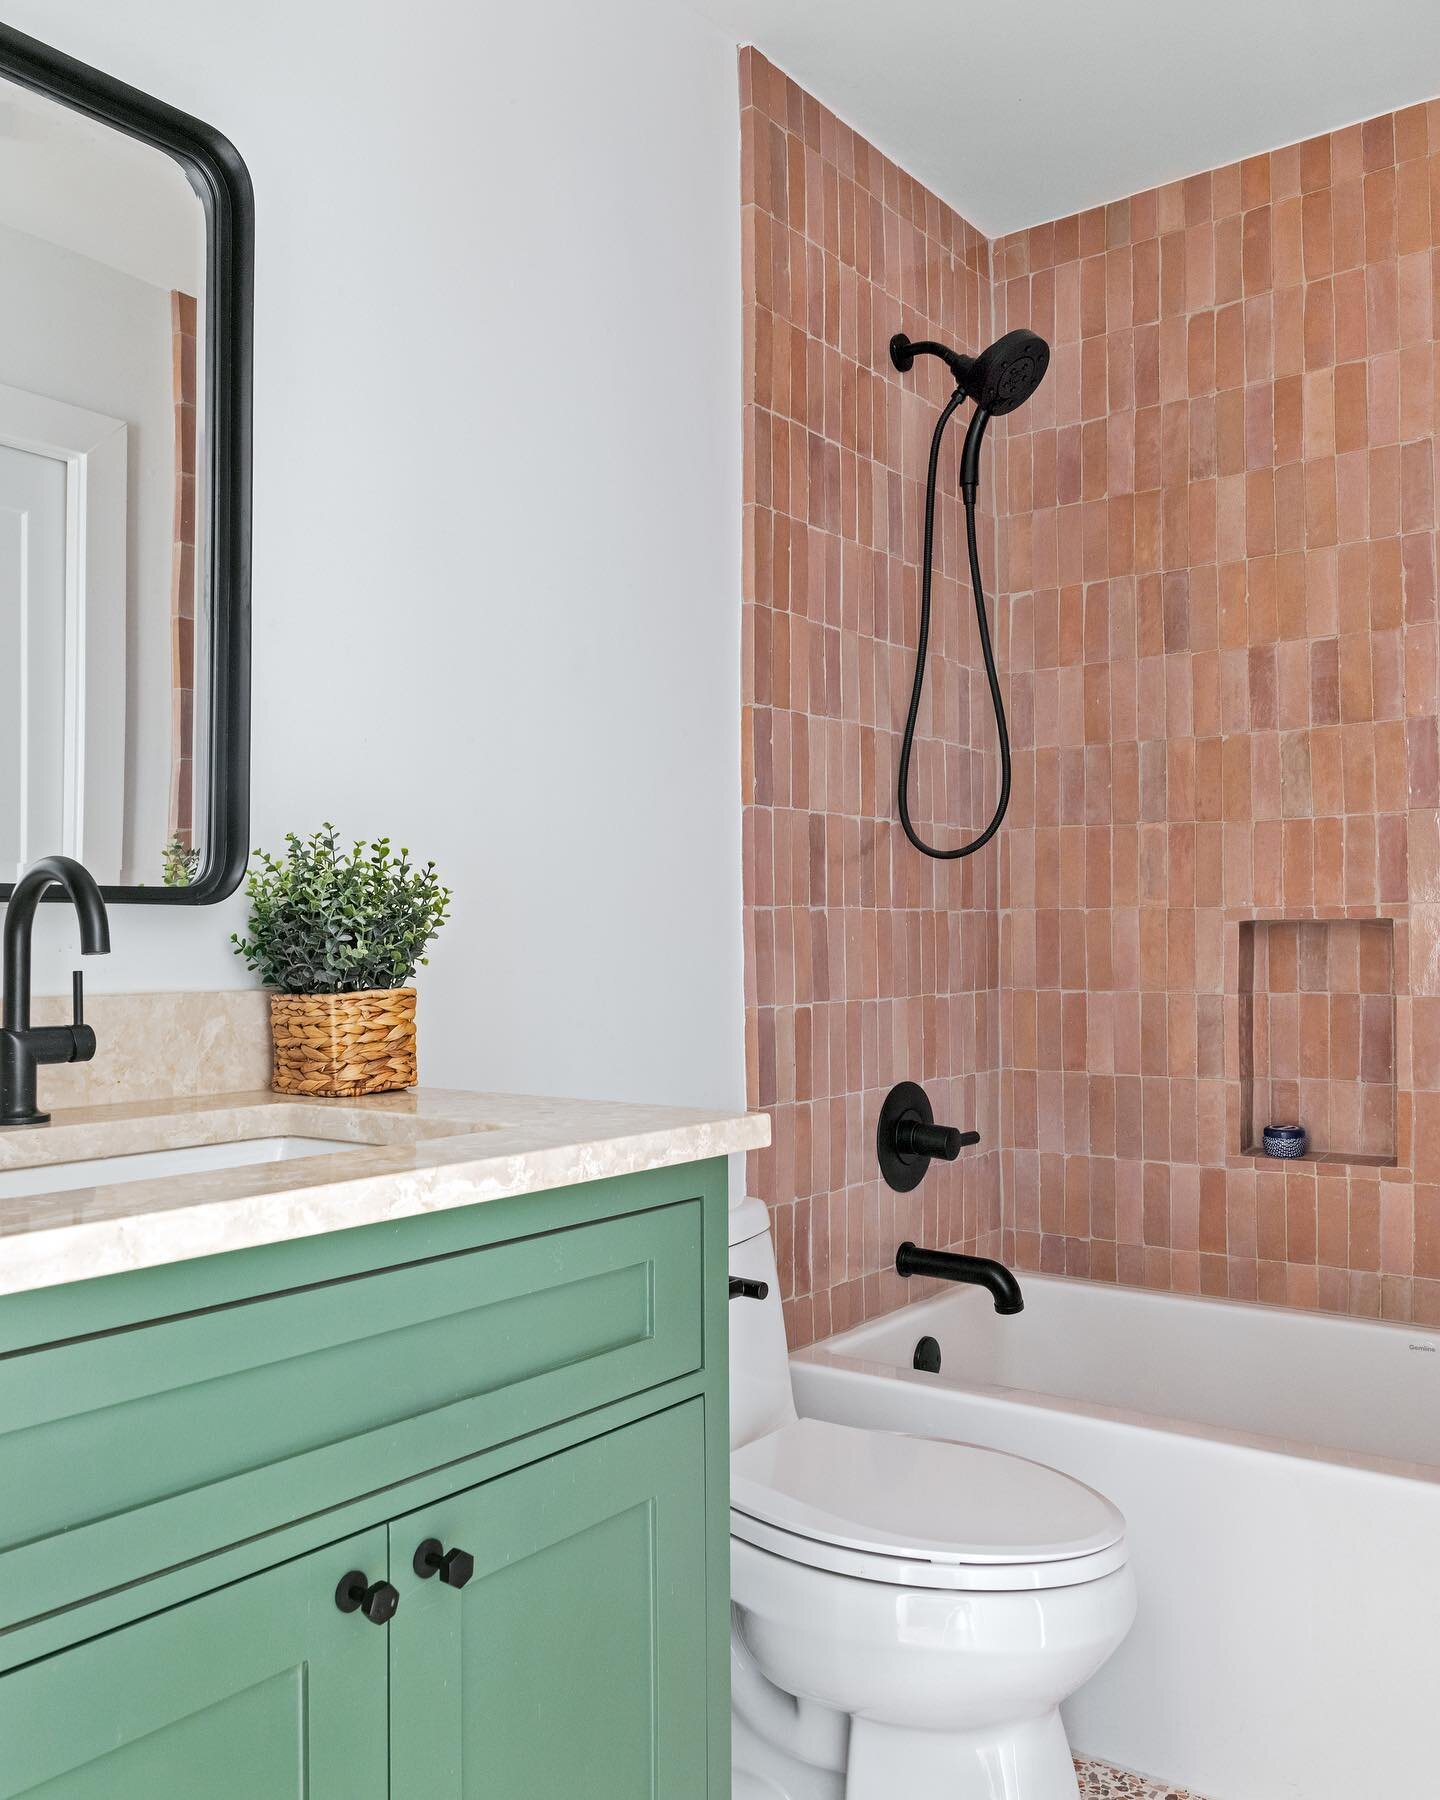 There&rsquo;s something about these bathroom from our Autumn Drive project. I think it&rsquo;s the color and texture of the tiles that do it for me 💙

Interior Design: @morrisseyhome 
Photography: @reganelizabethphotography